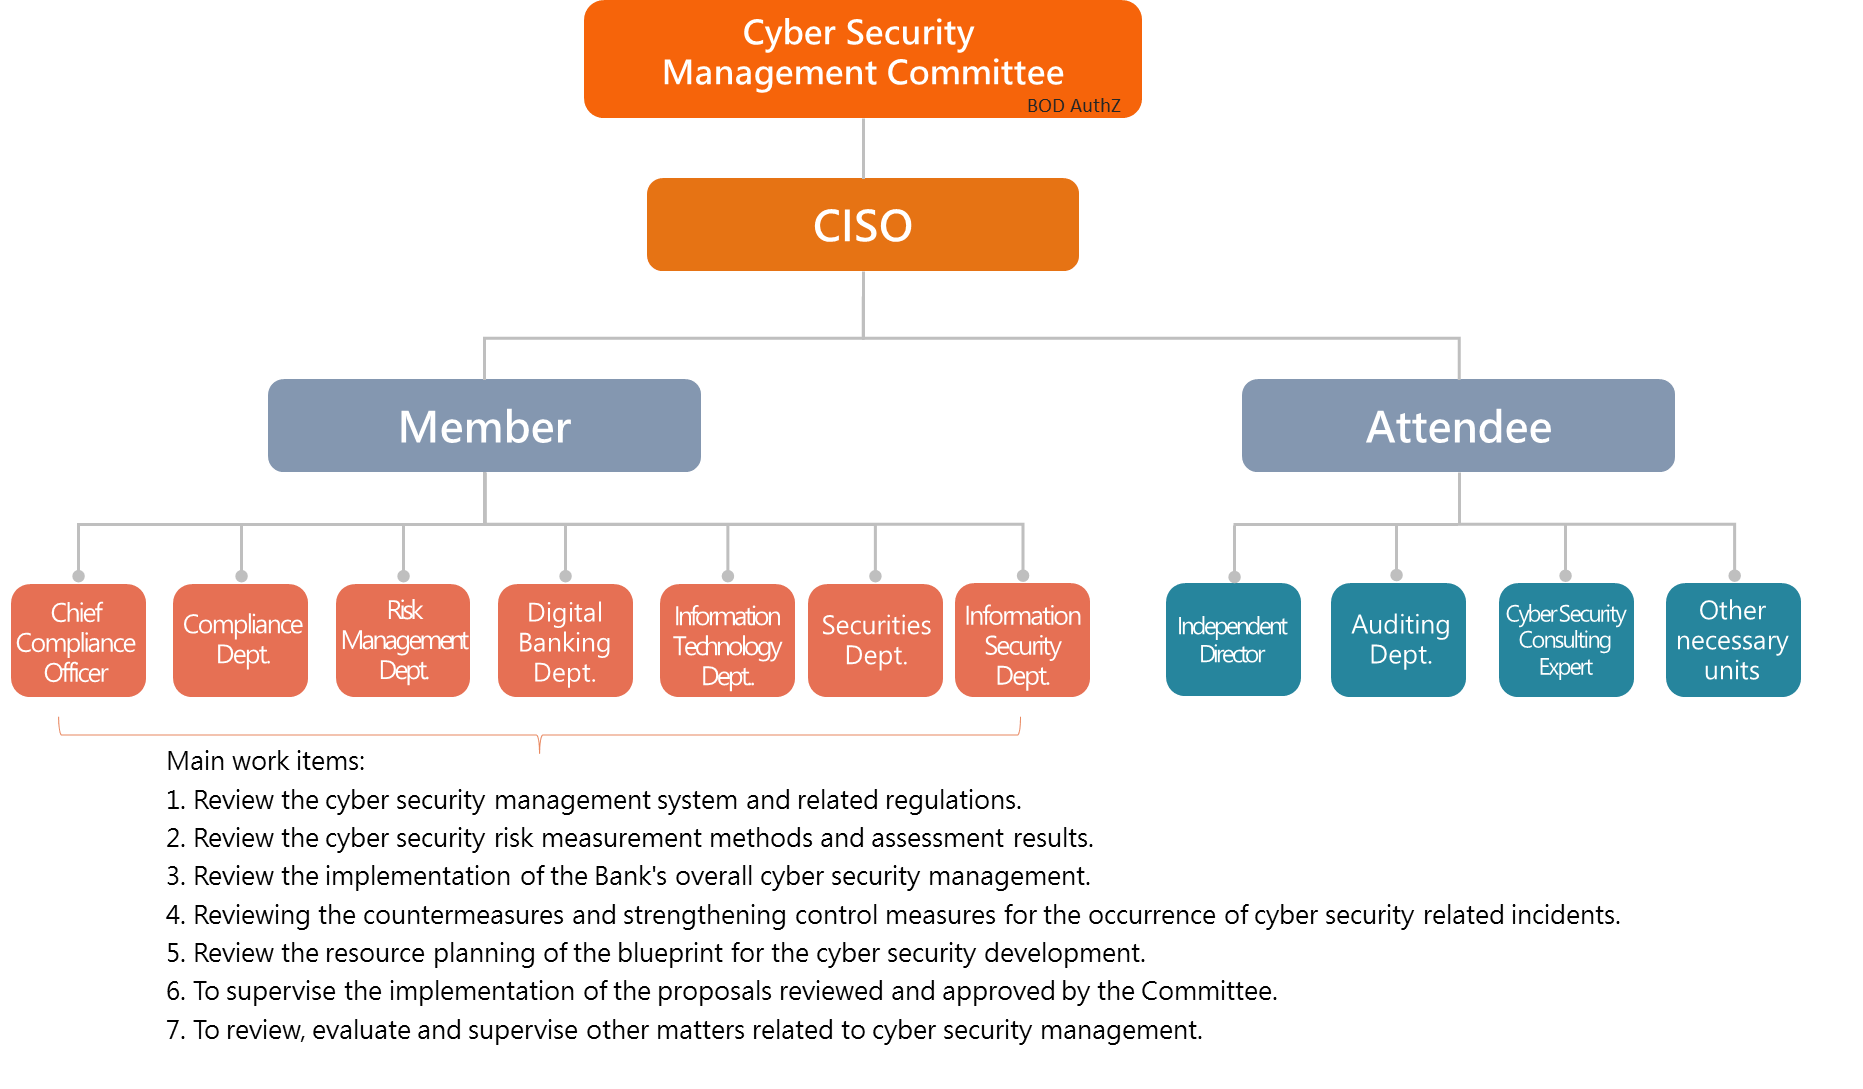 Cyber Security Management Committee functions